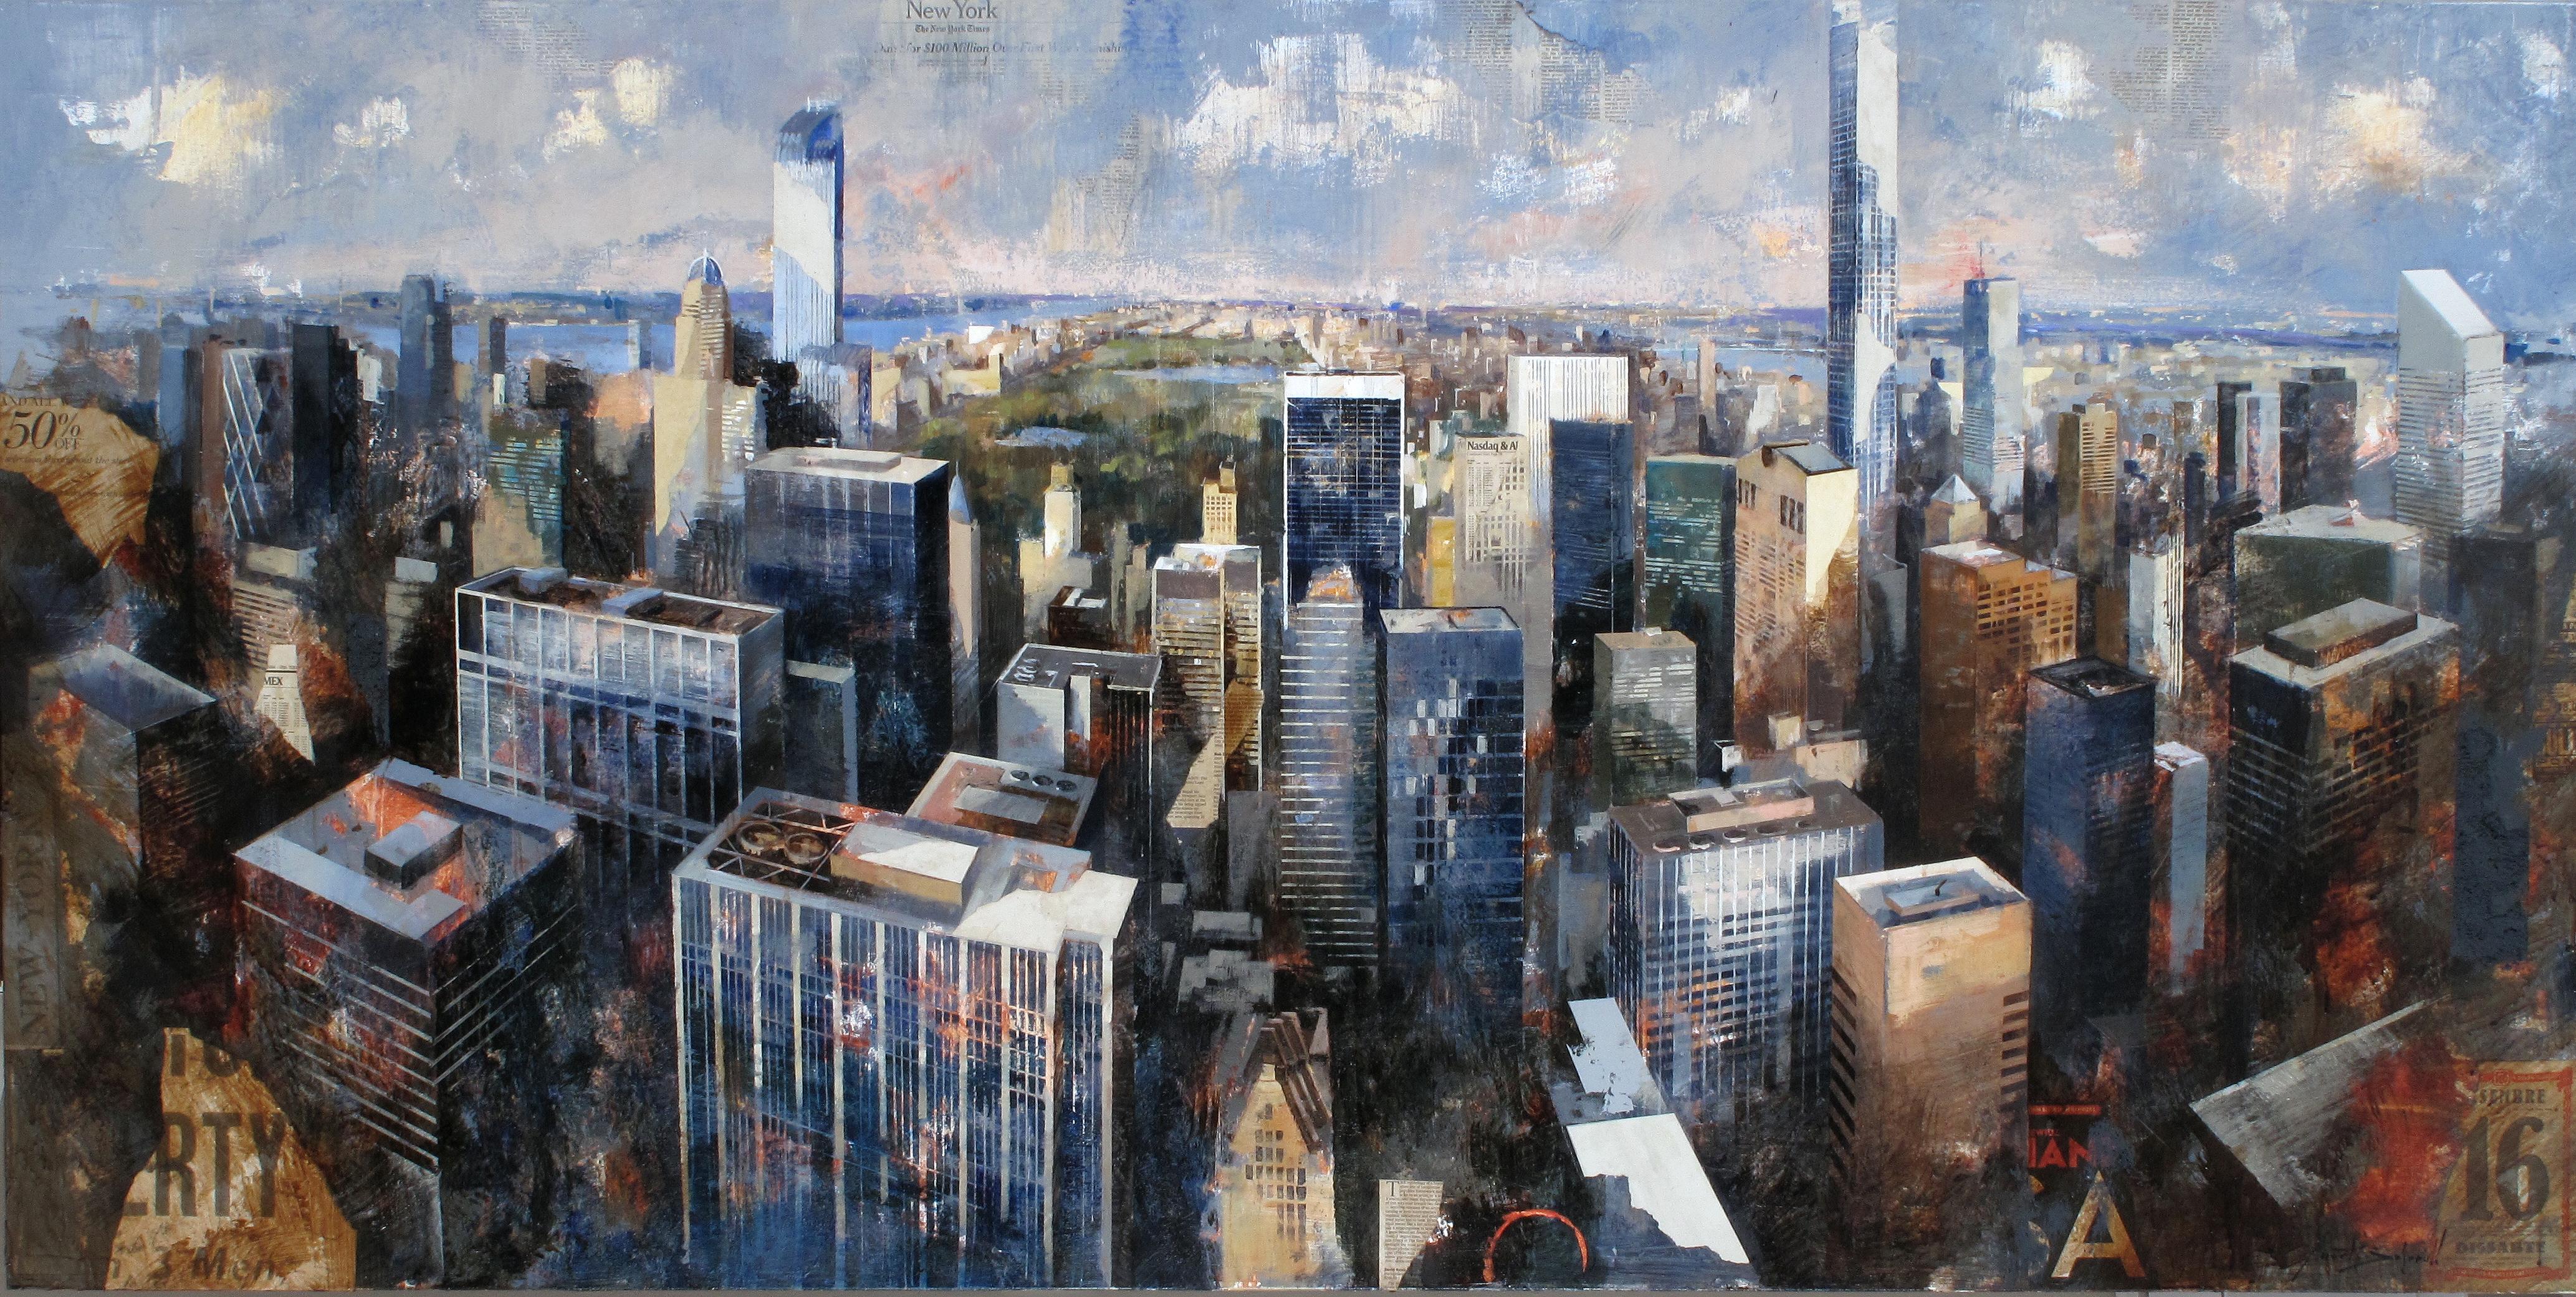 "Martí Bofarull’s work fits in with renovation of the urban landscape that has characterized Catalan painting of the last twenty years. Among our artists who have remained loyal to figurative techniques, several have successfully fixed their gaze on